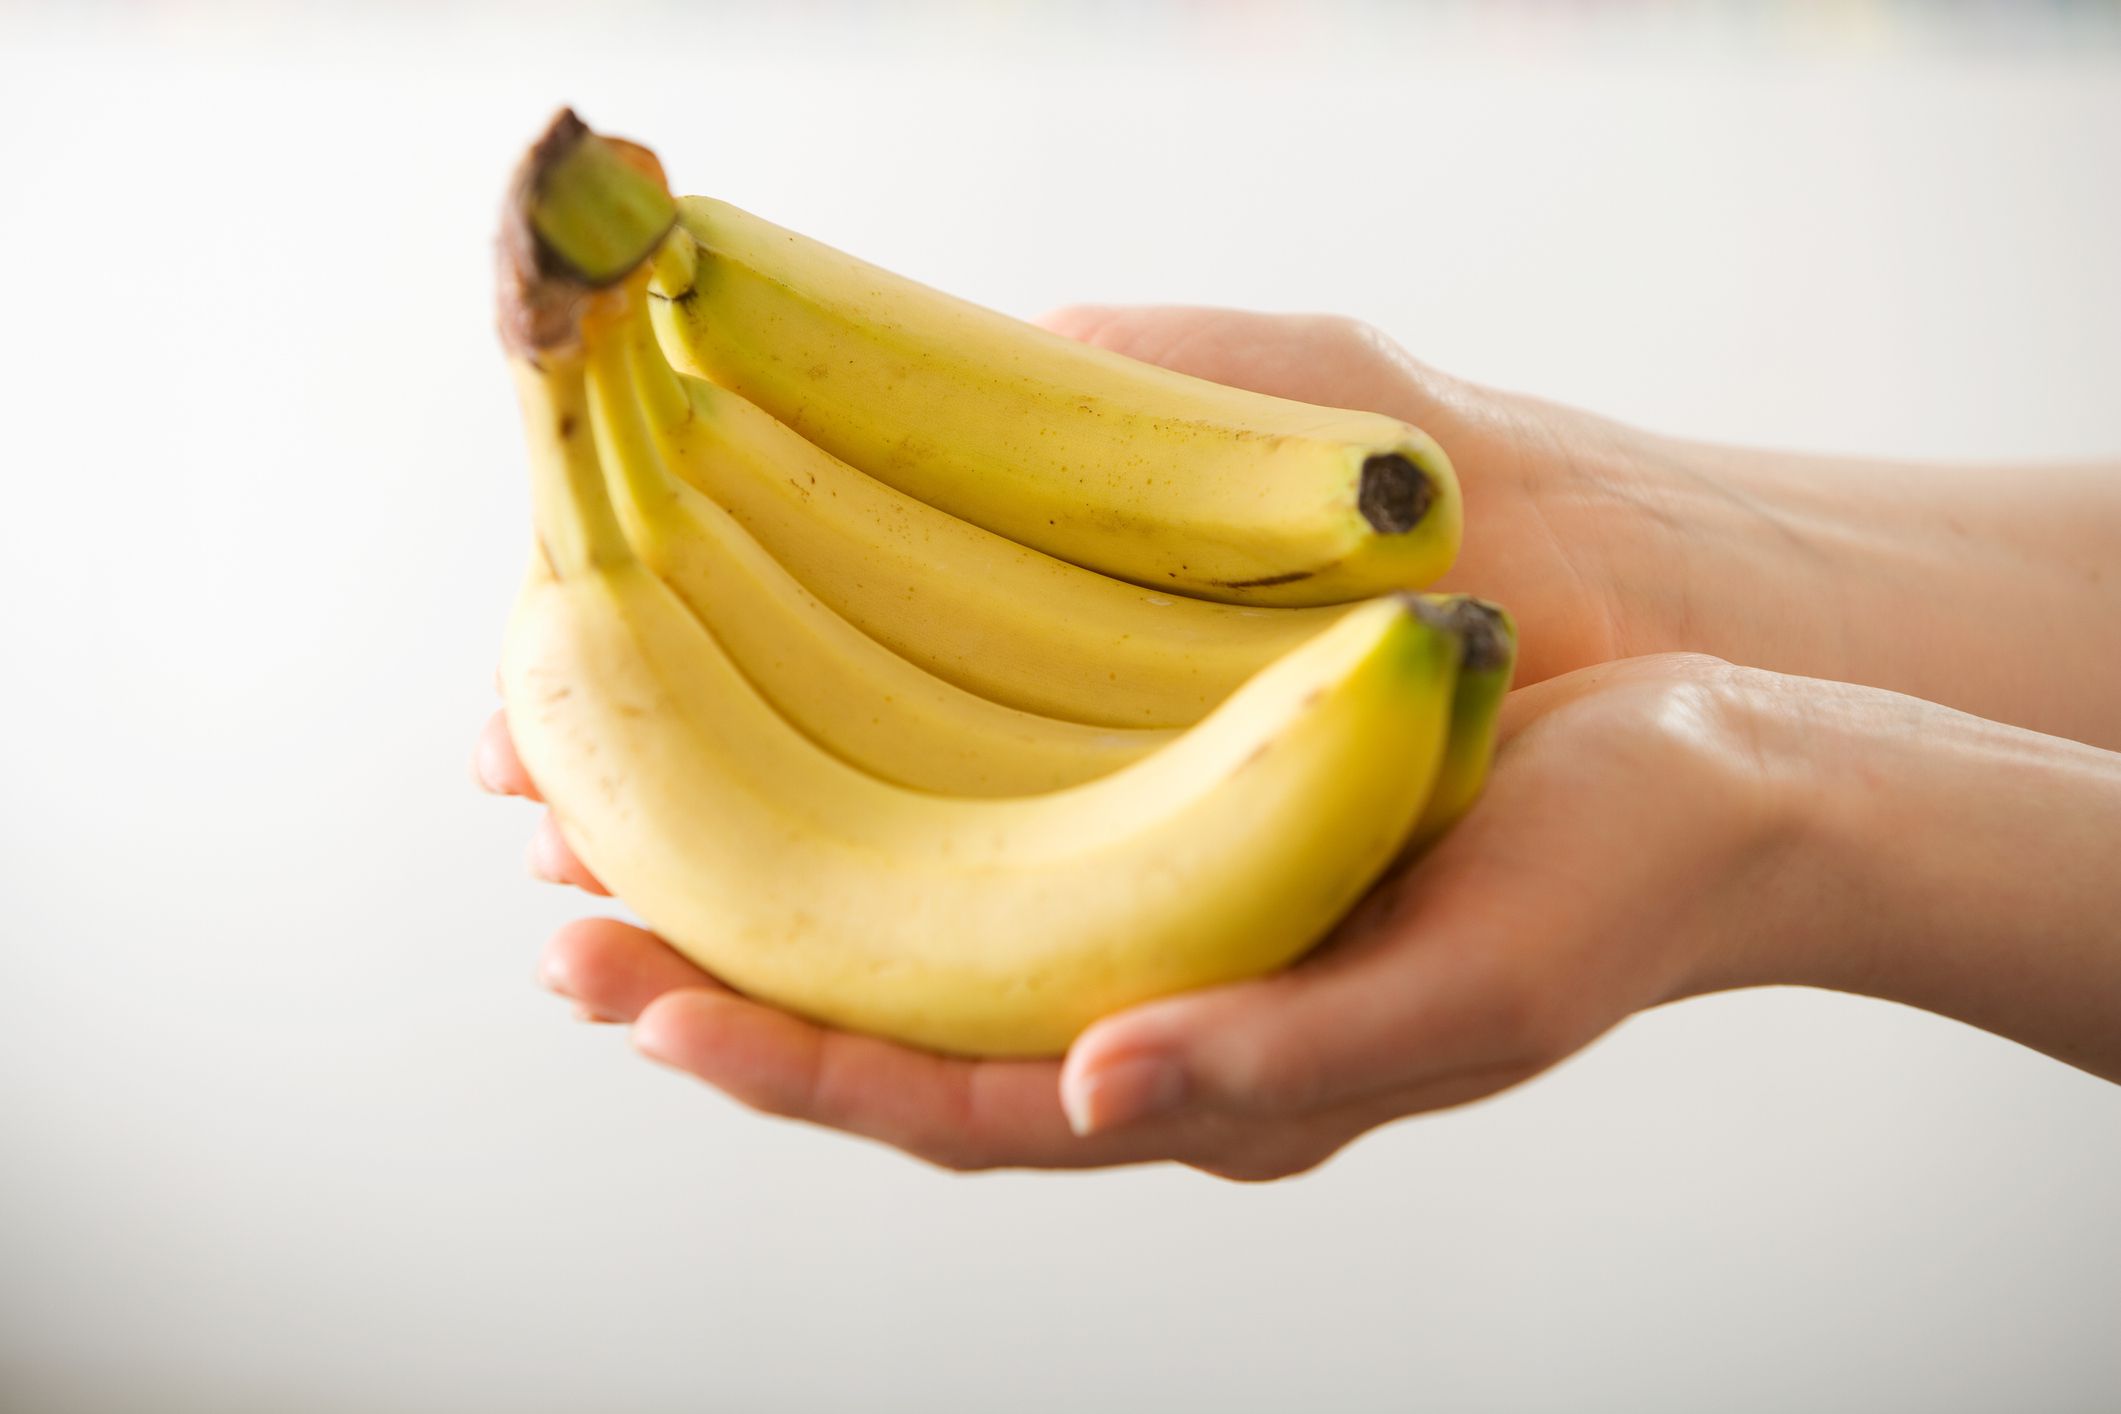 Are Bananas Bad for Arthritis? Pros and Cons